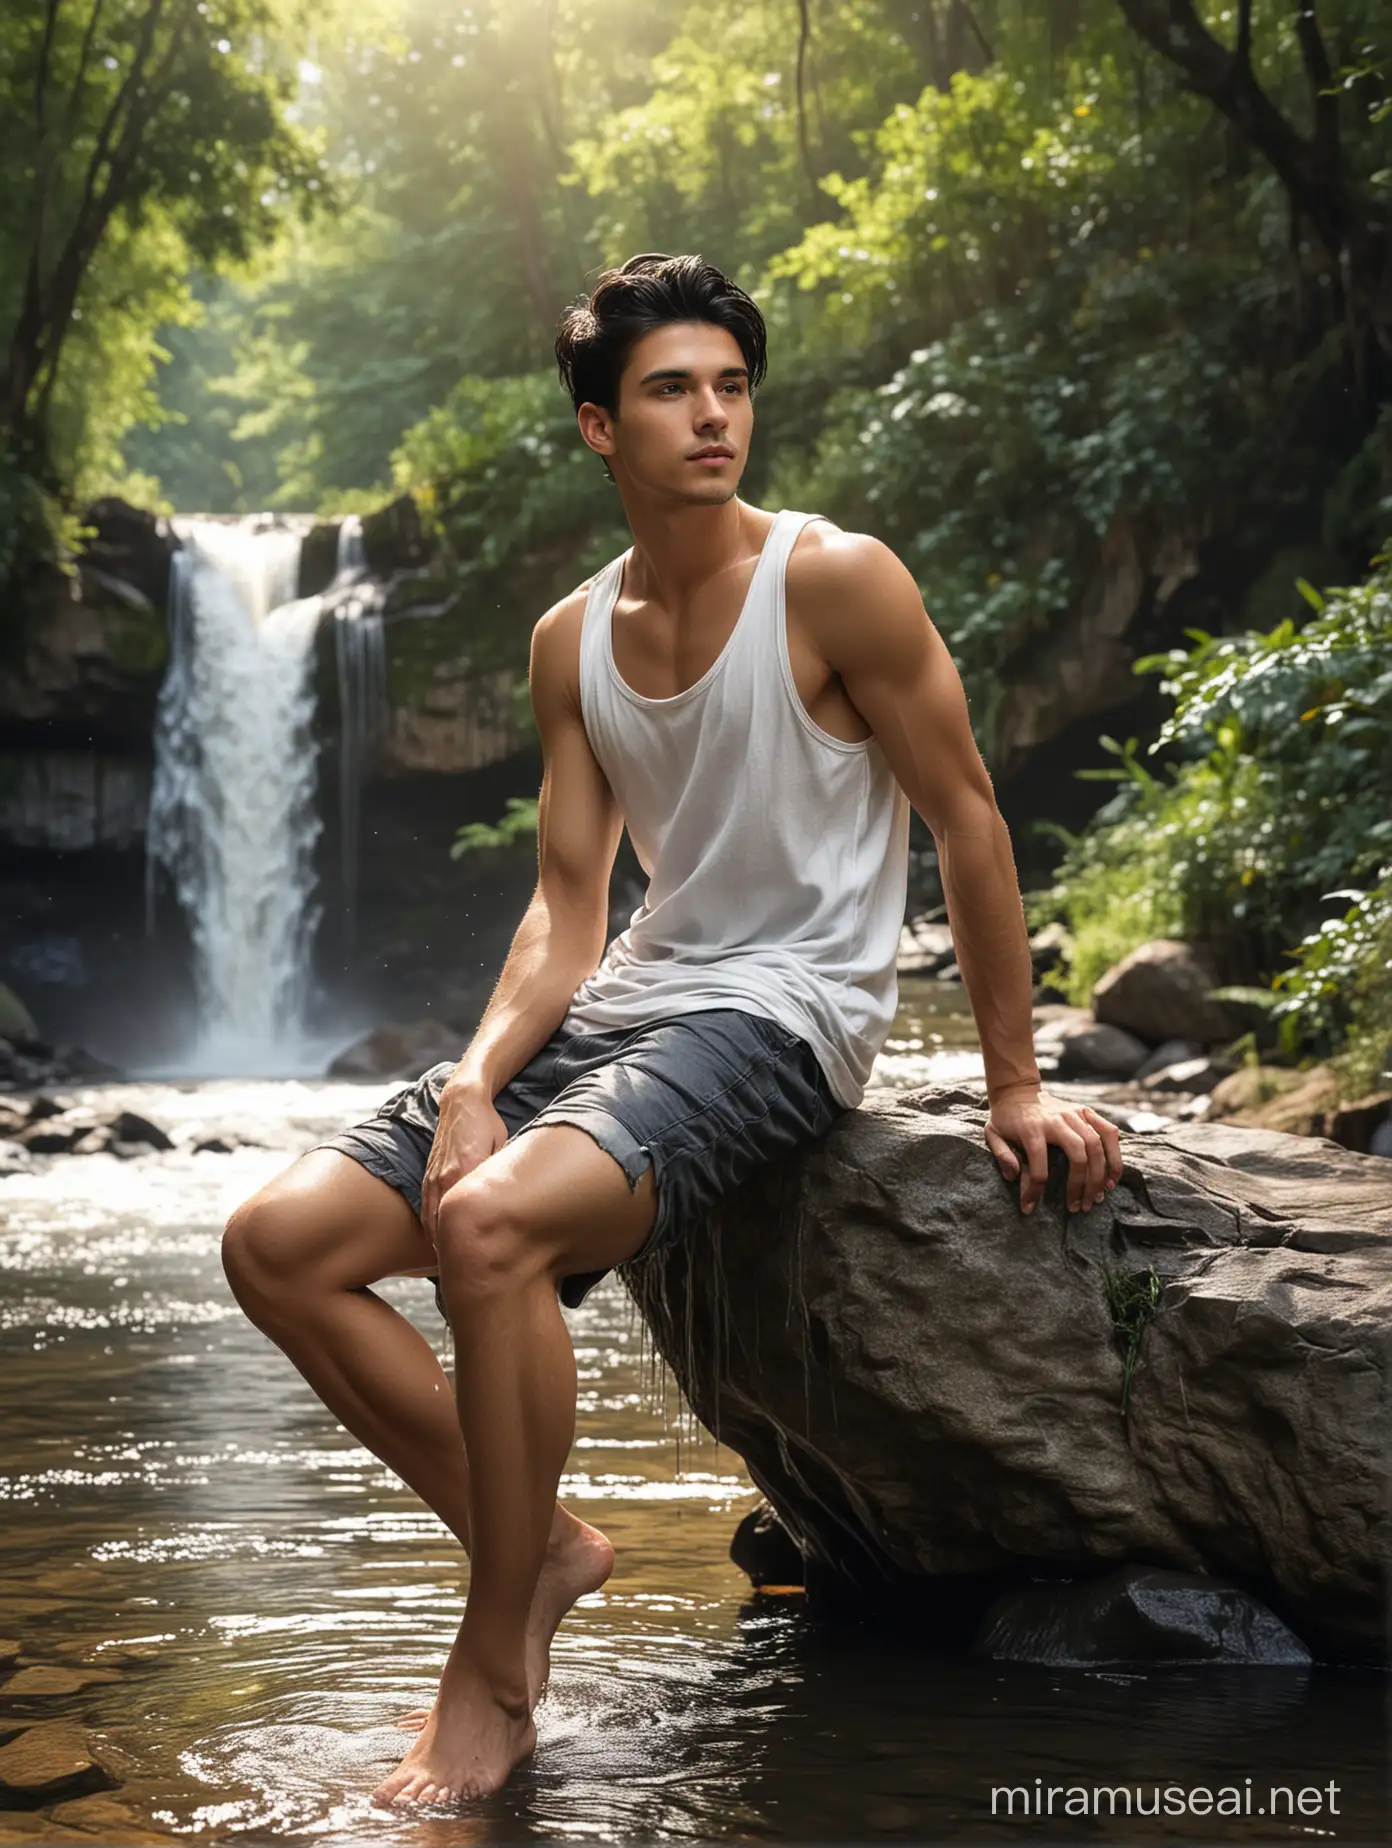 At the forest river water fall, a gorgeous super model very handsome man, 18 year old, wearing white singlet, black hair, sitting. Ultra realistic
